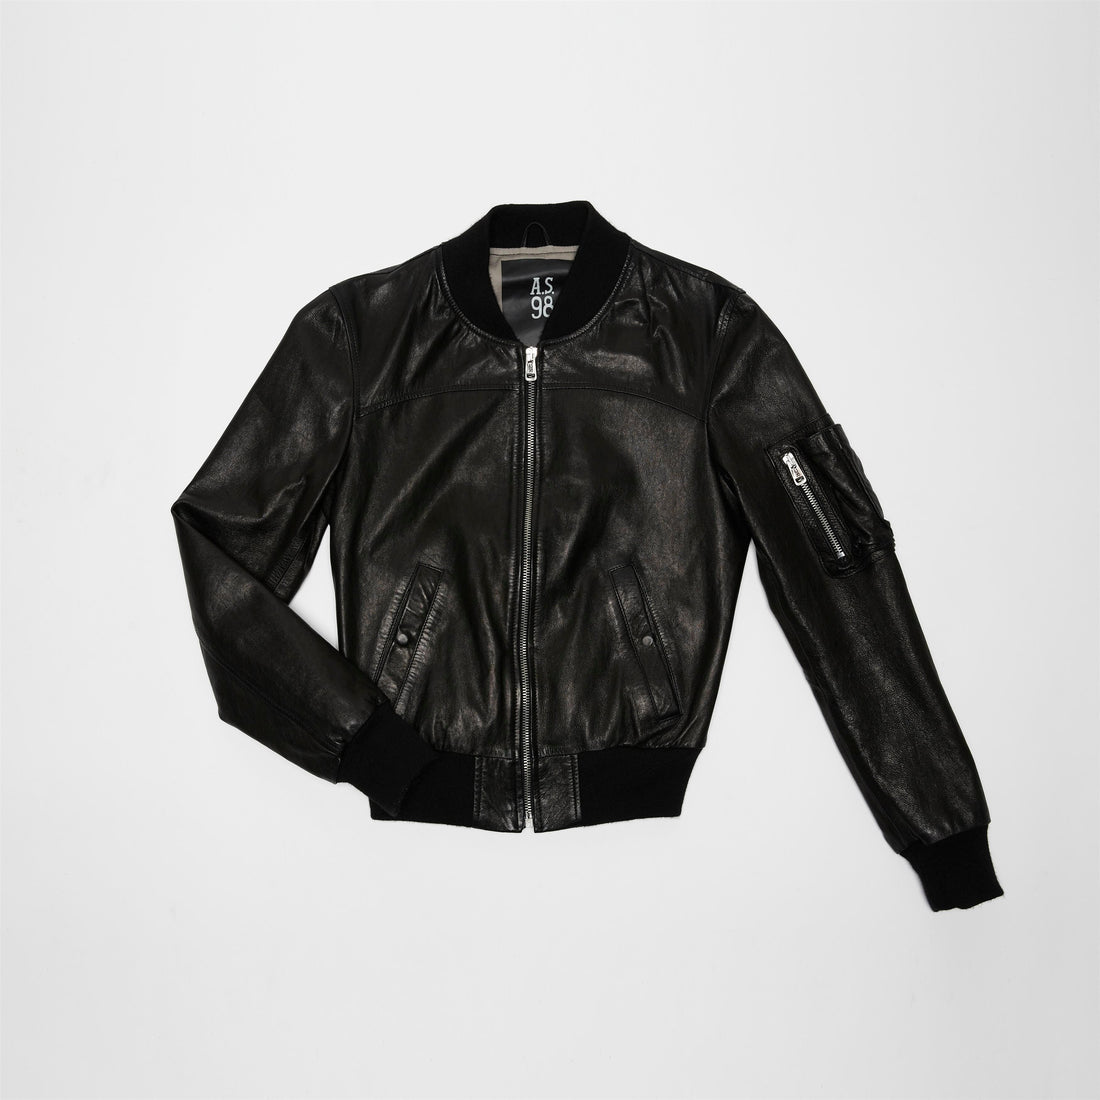 A.S.98 Leather Jacket - Amber - A.S. 98 - 